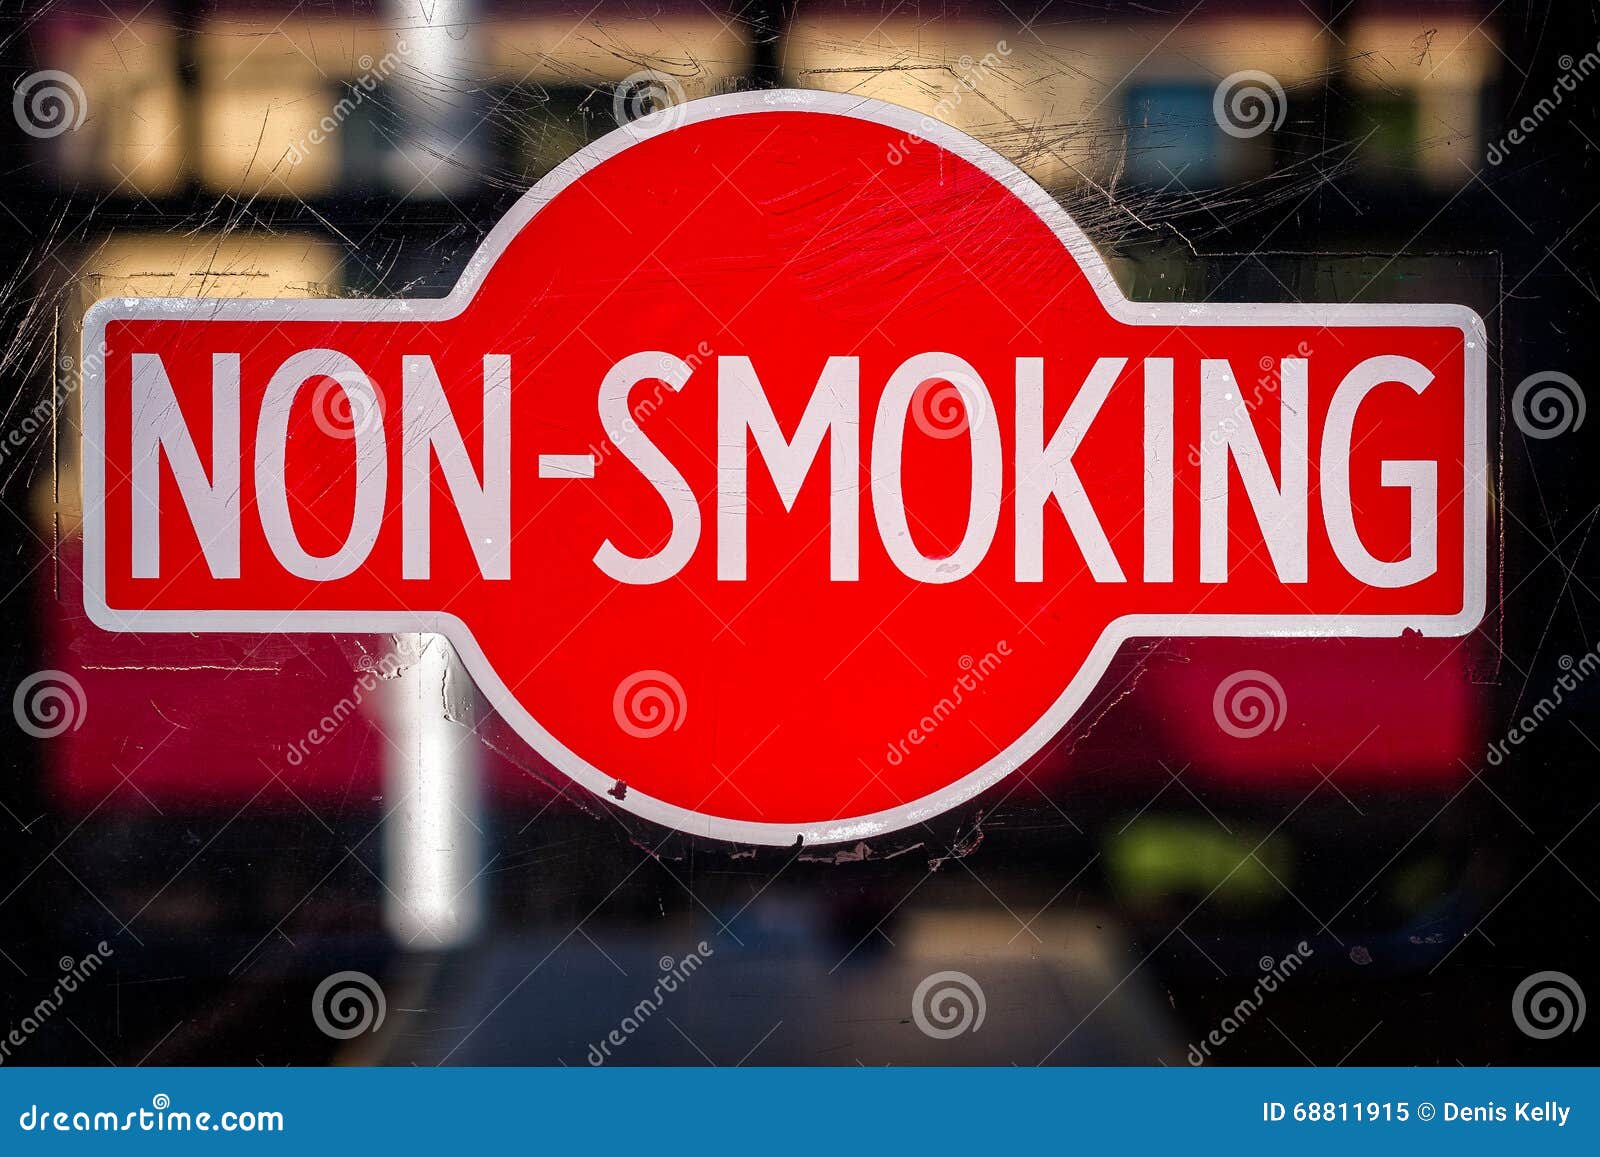 Vintage Red Non Smoking Sign Stock Image - Image of window, information ...